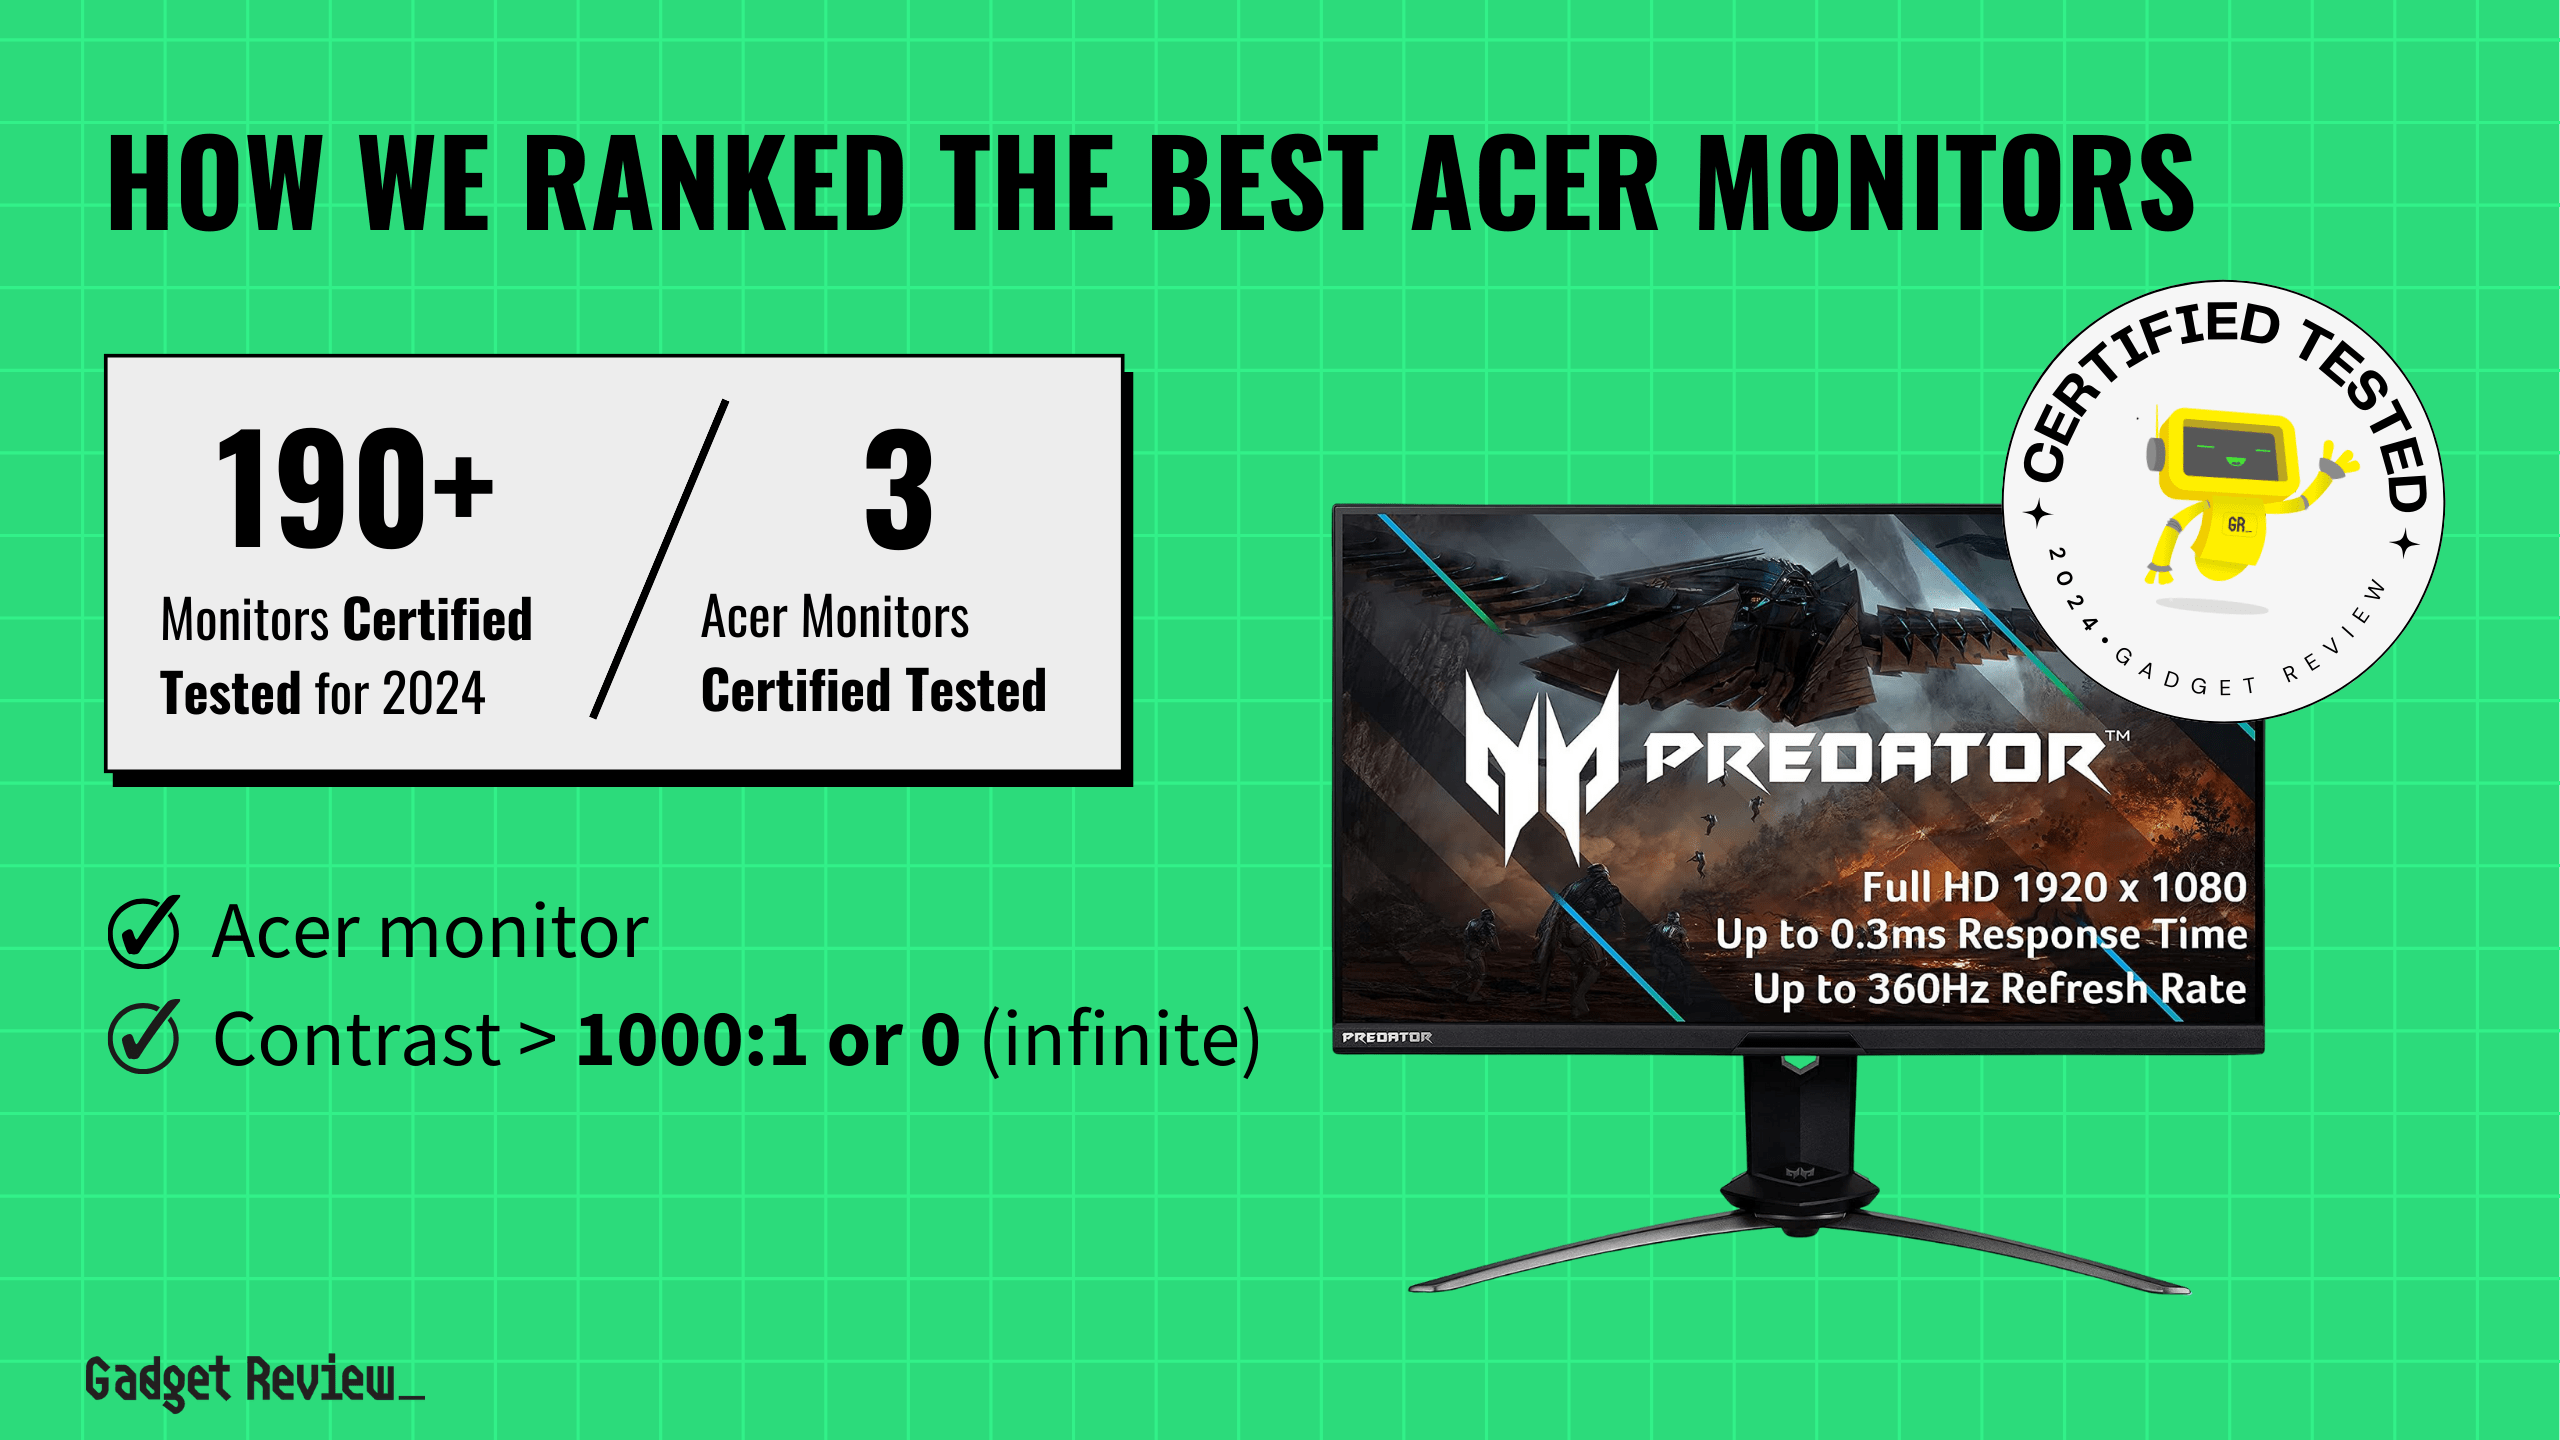 What Are The Top 3 Acer Monitors?